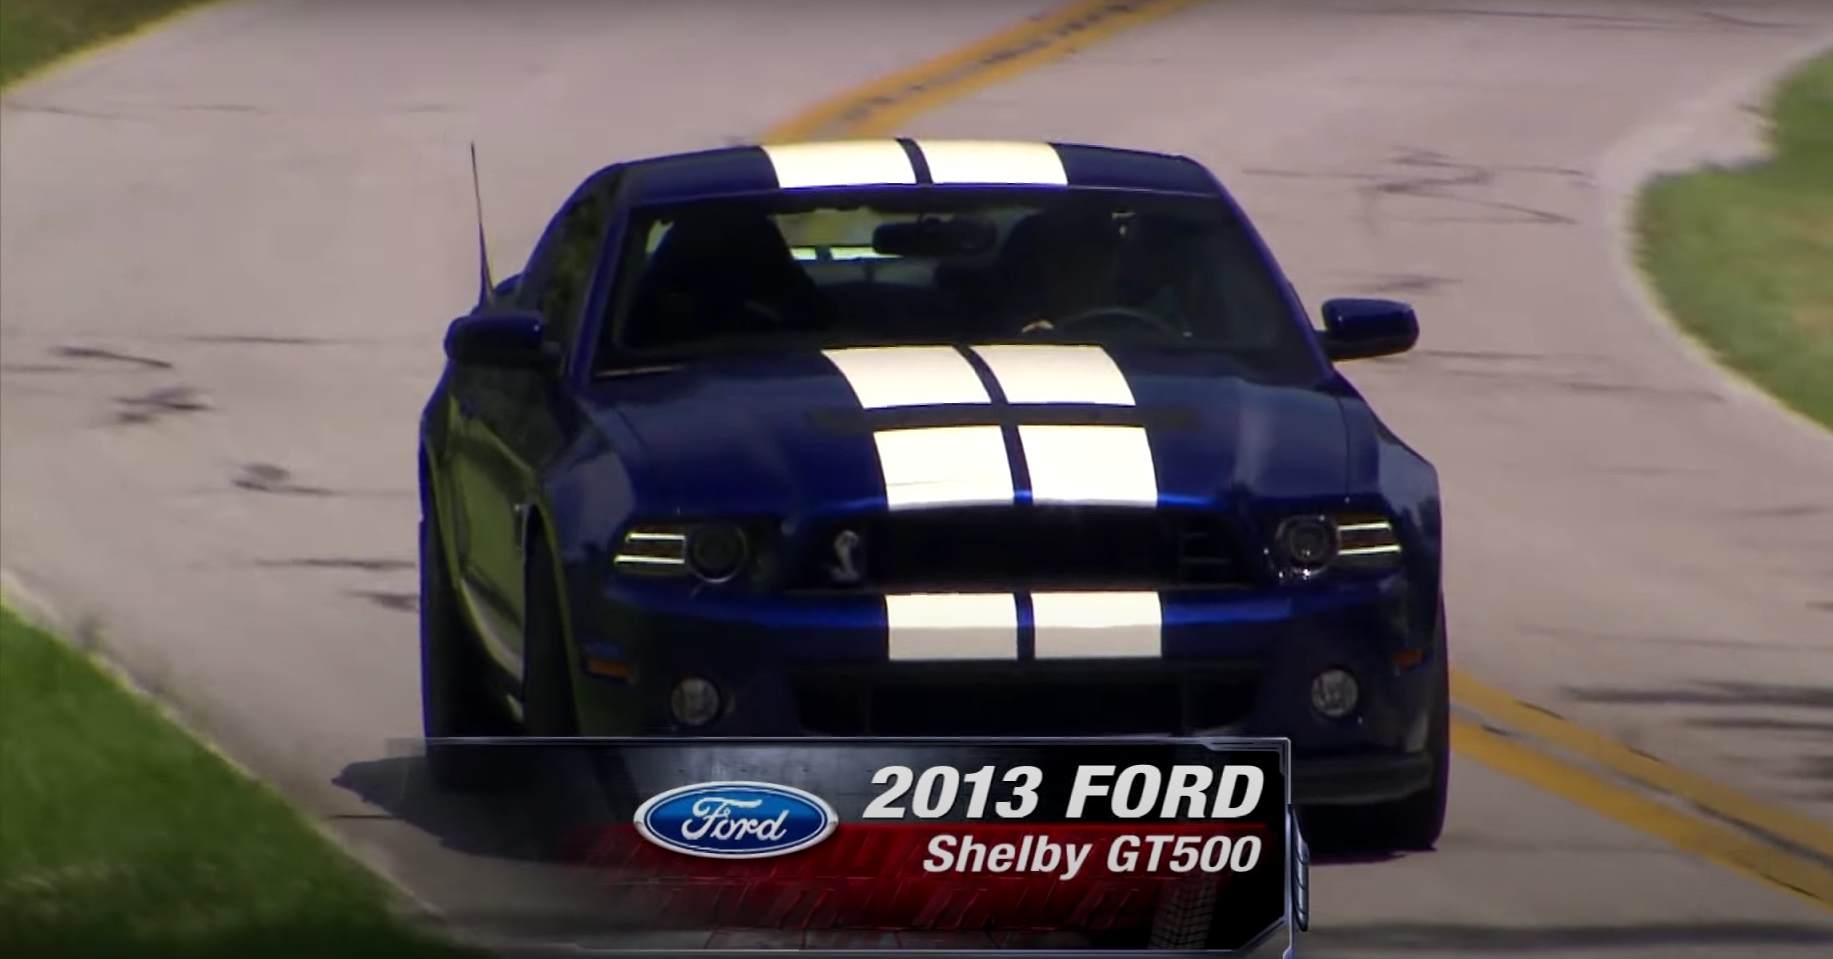 Video: 2013 Ford Shelby GT500 Road Test